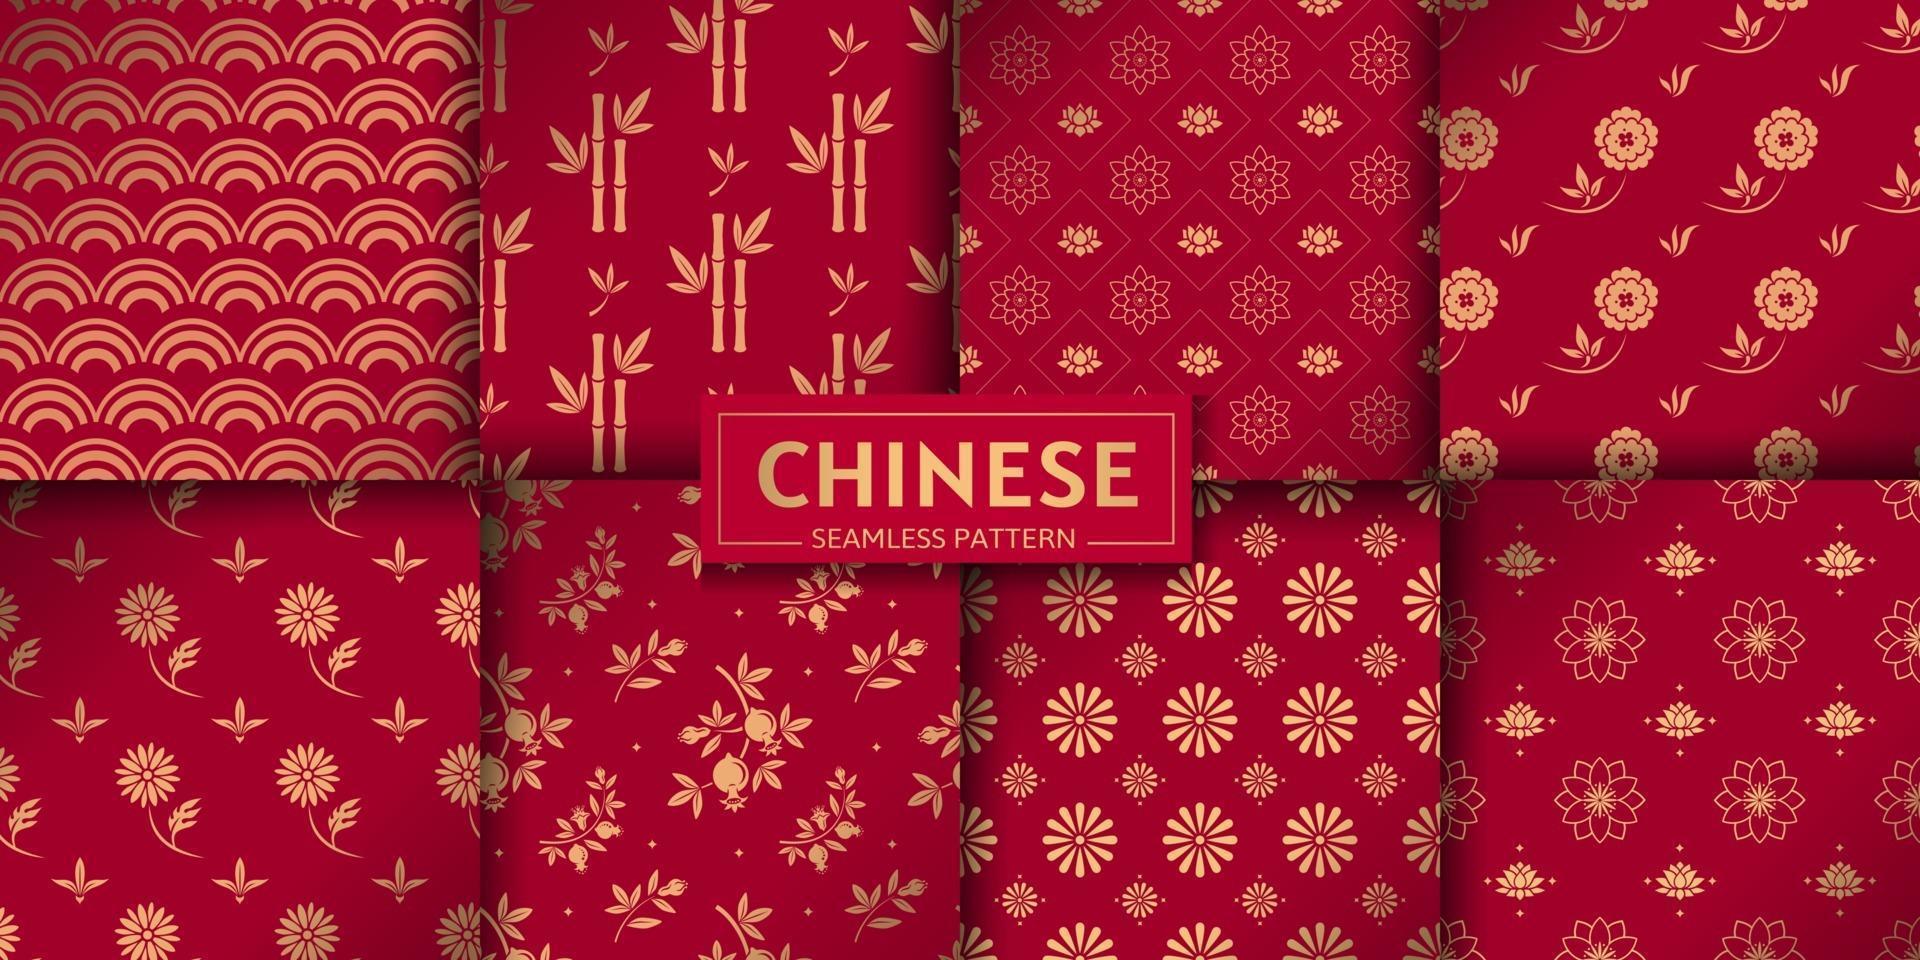 Chinese seamless pattern. Vector set. Floral, marine textures.